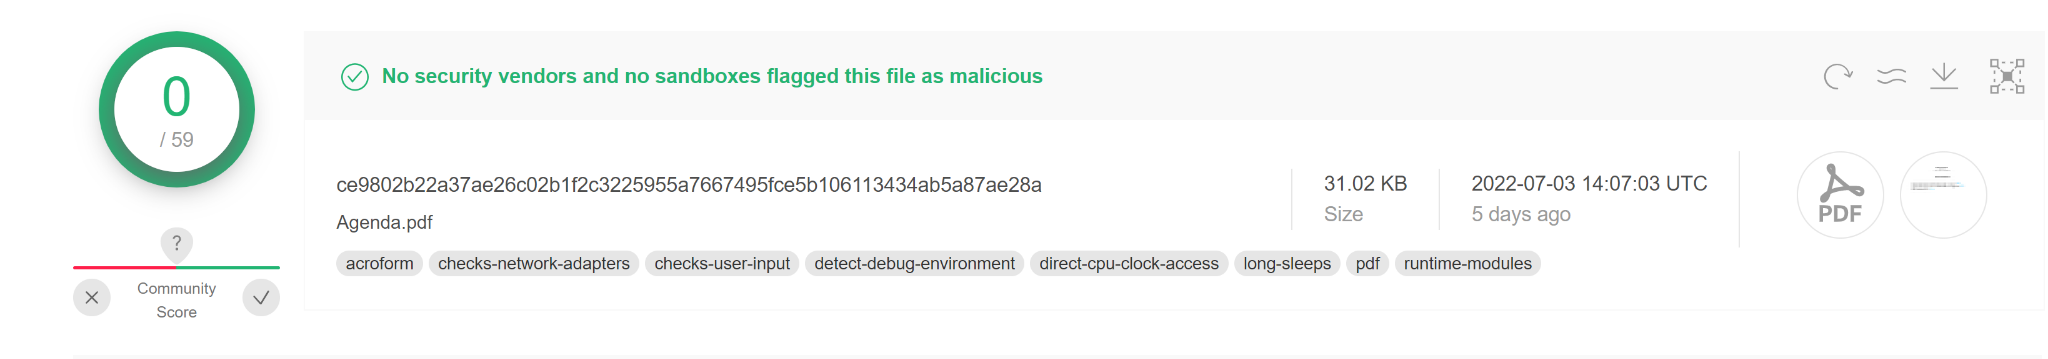 The screenshot shows that the Campaign 2 lure file Agenda.pdf shows no detections in VirusTotal at the time of writing. 